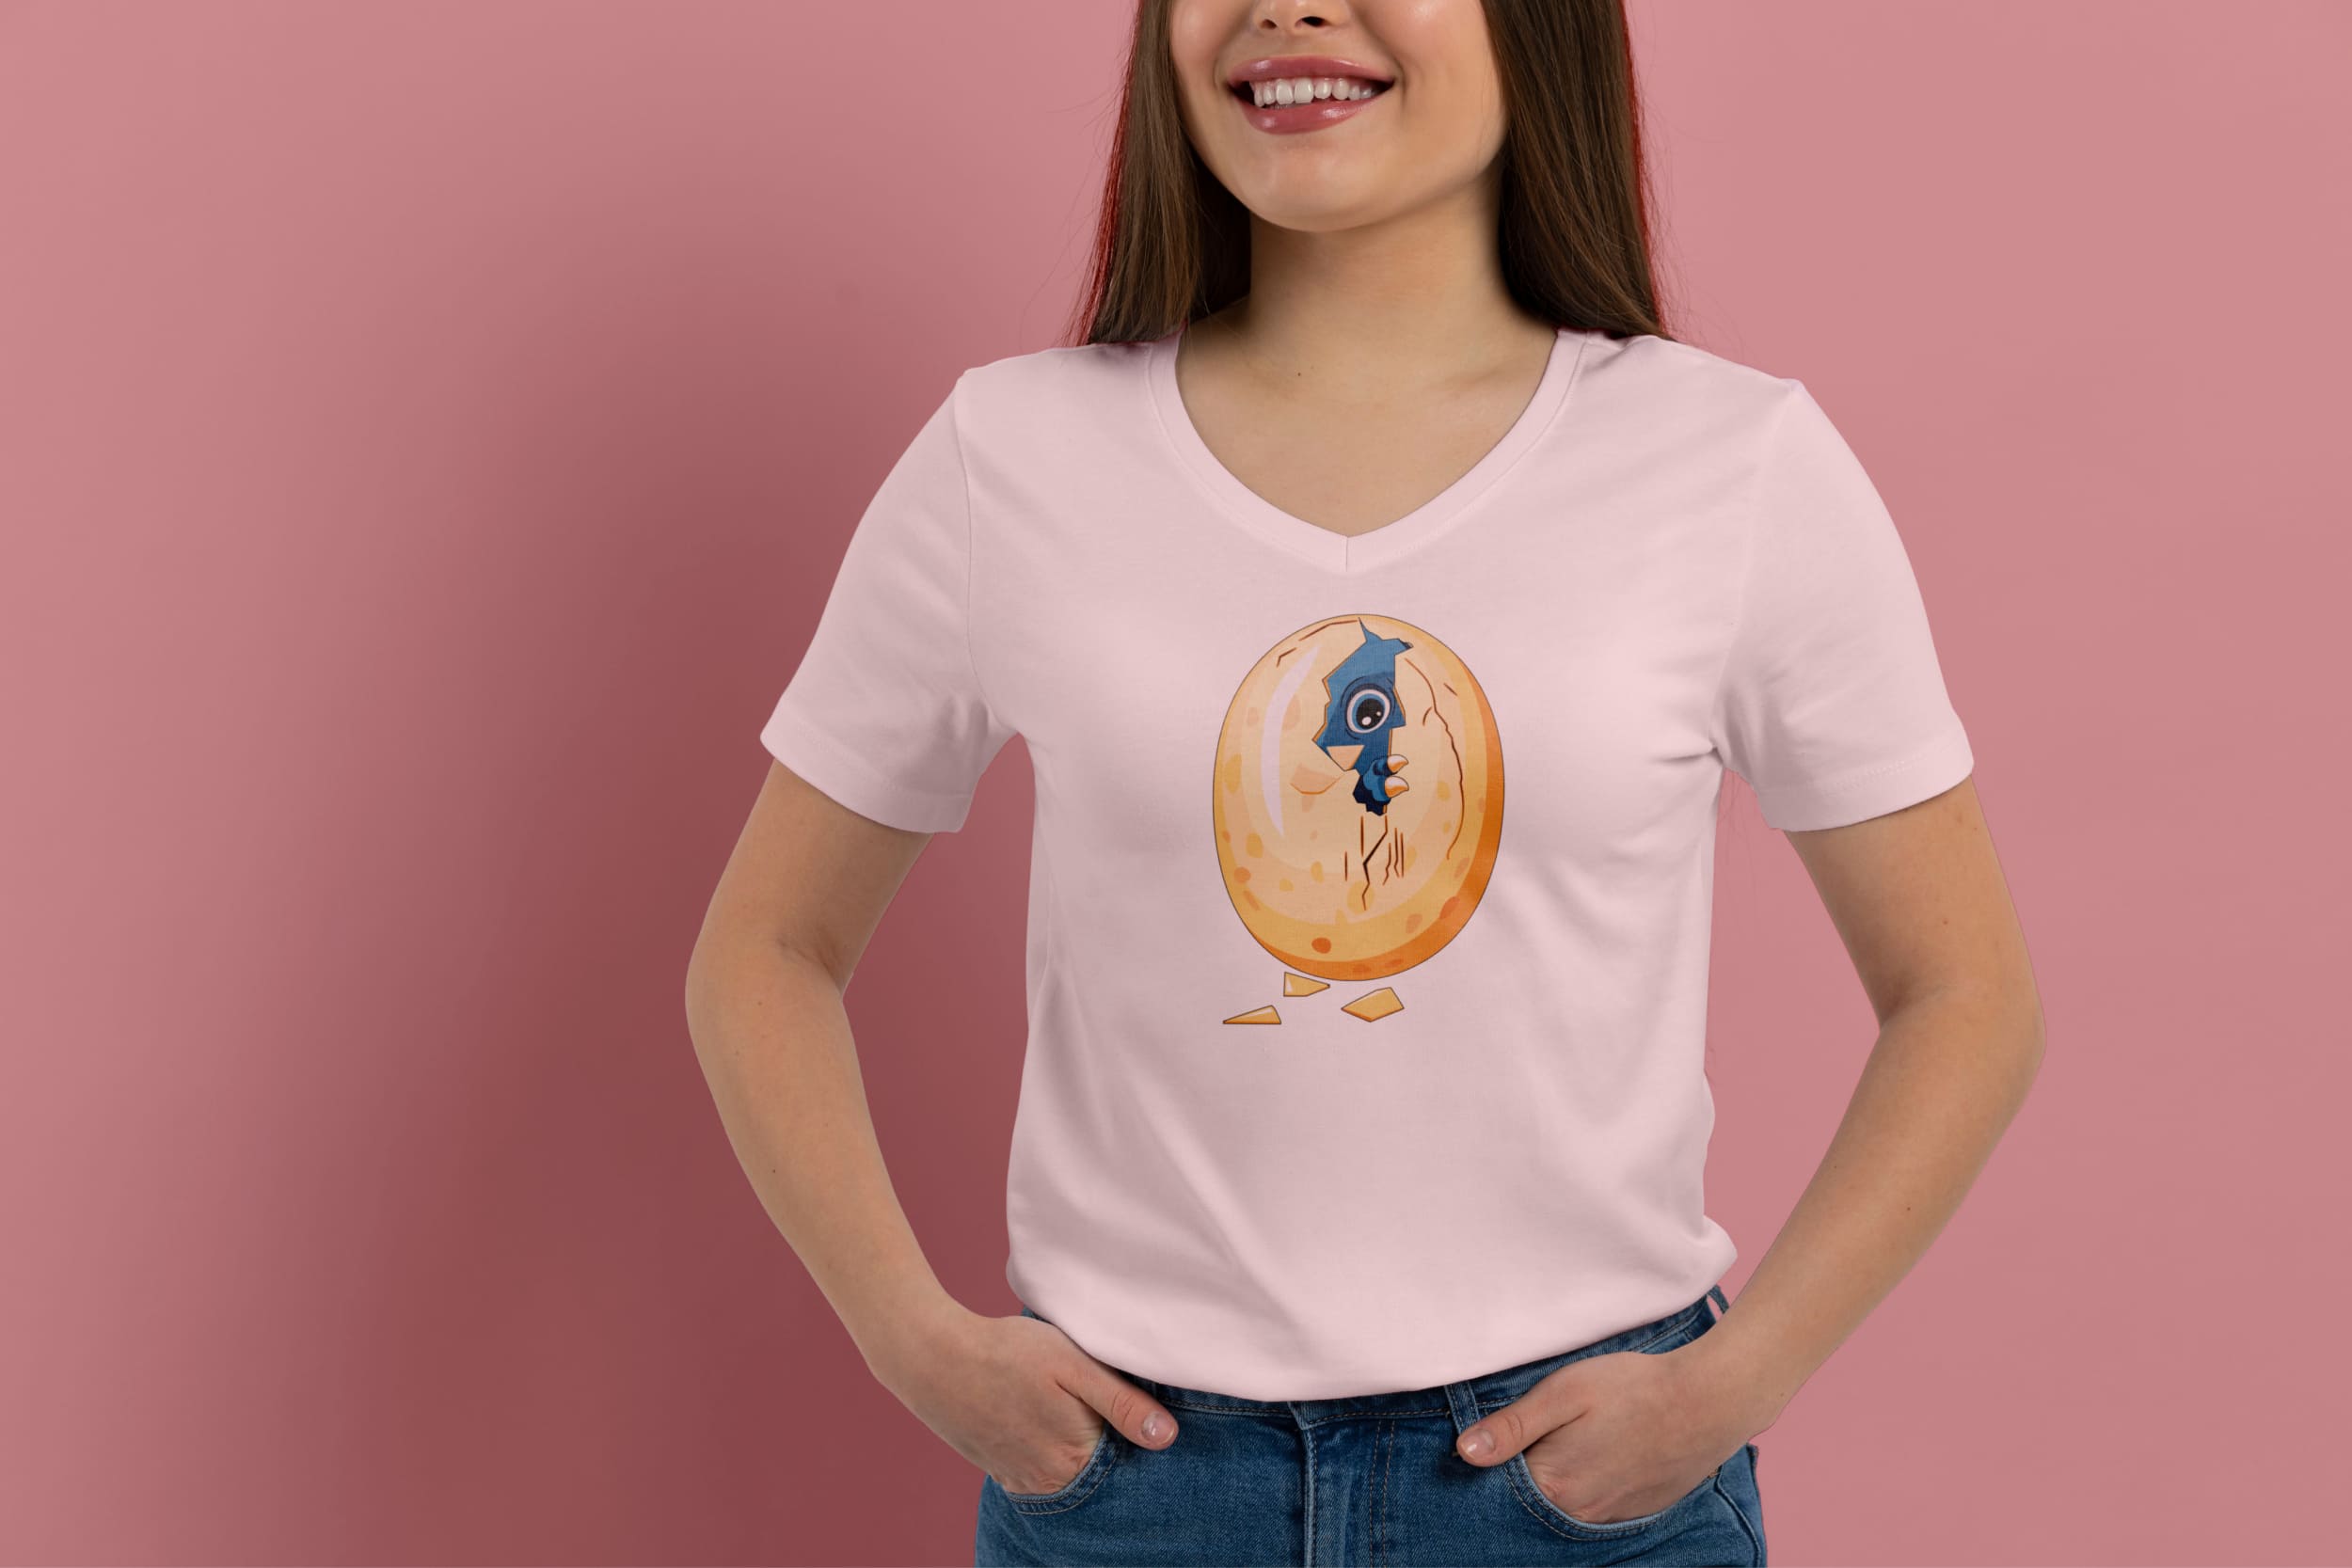 Light pink T-shirt on a girl with a blue dragon in an egg, on a pink background.